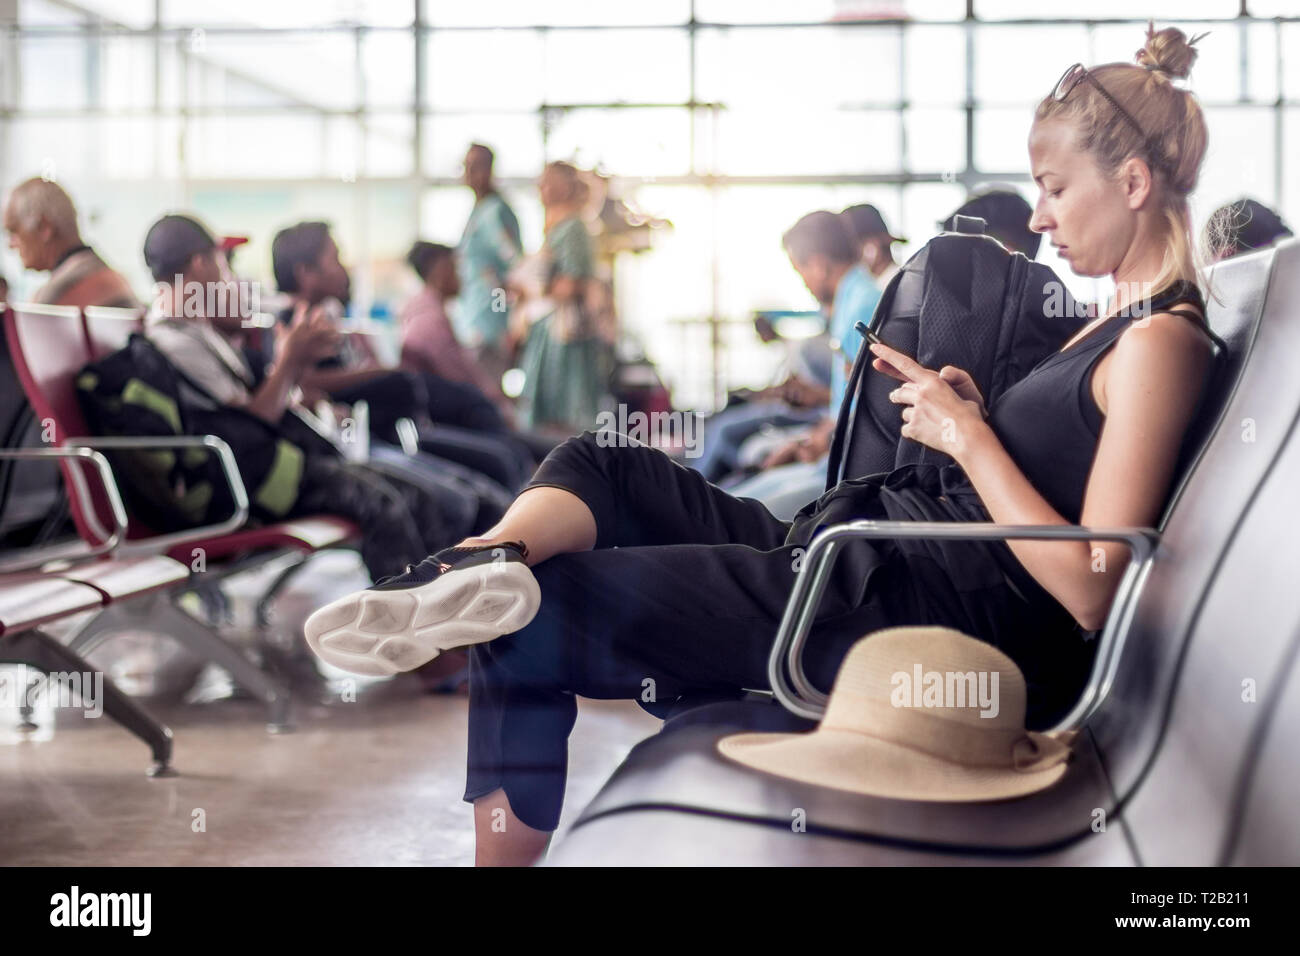 Female traveler using her cell phone while waiting to board a plane at departure gates at asian airport terminal. Stock Photo